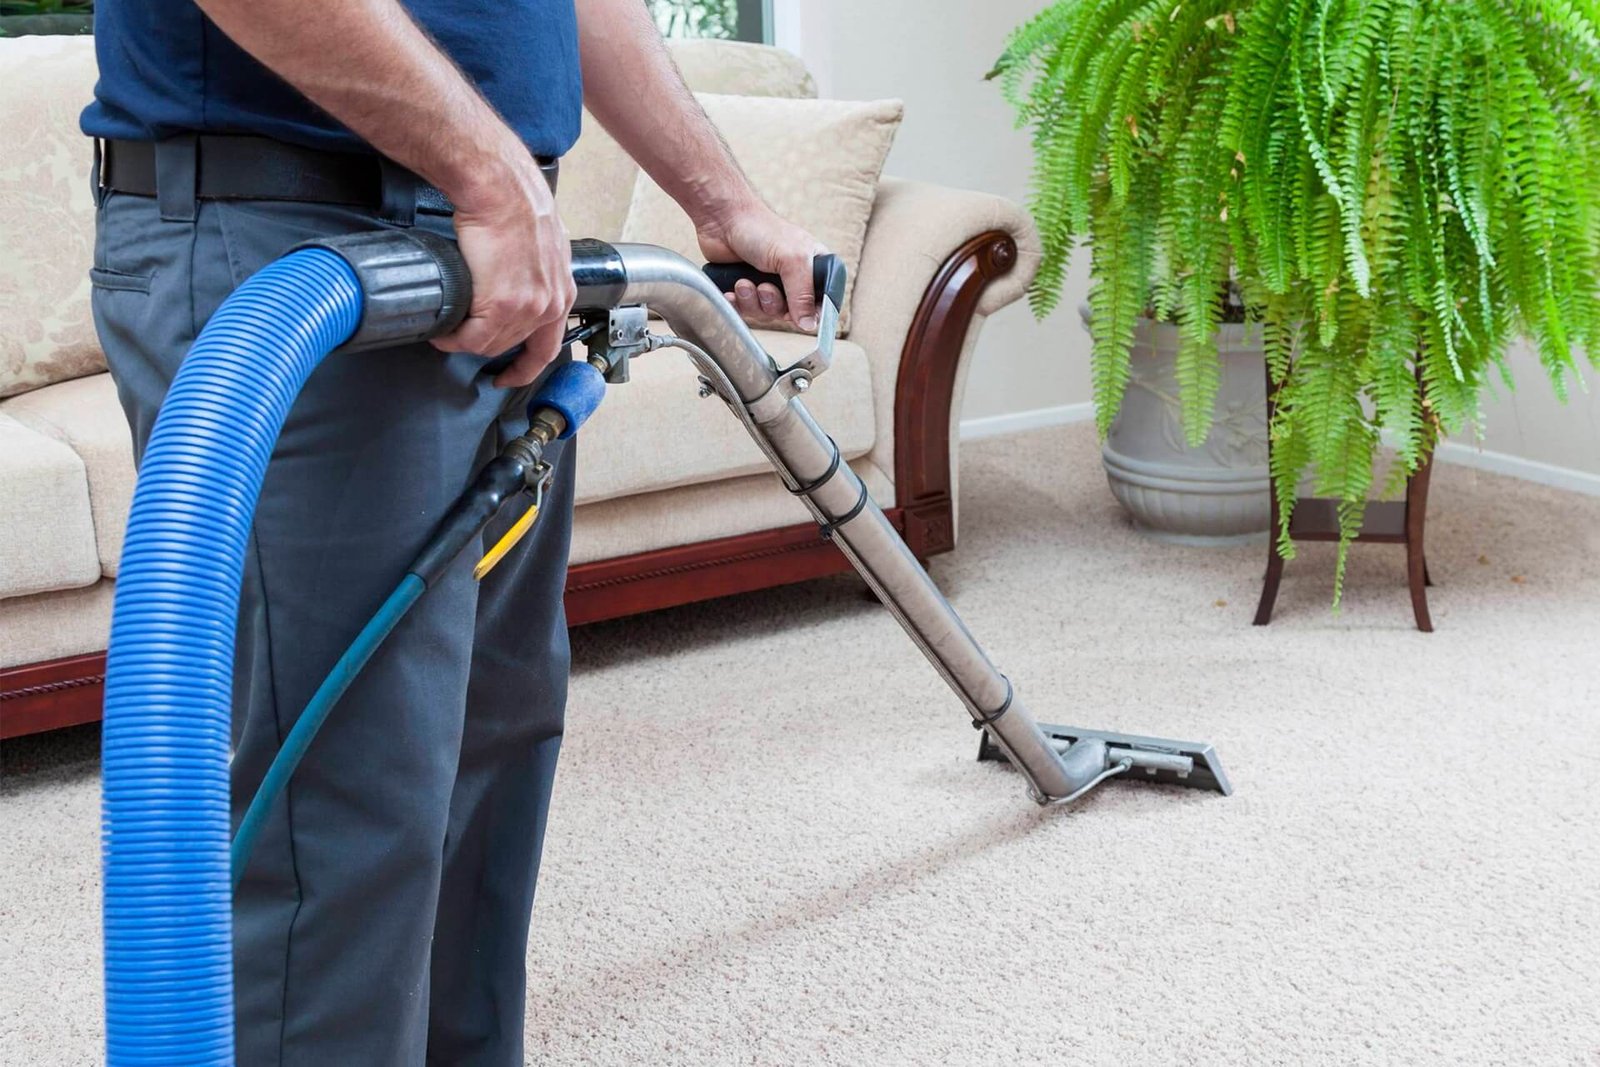 Professional Carpet Cleaners Sharing Best Cleaning Secrets